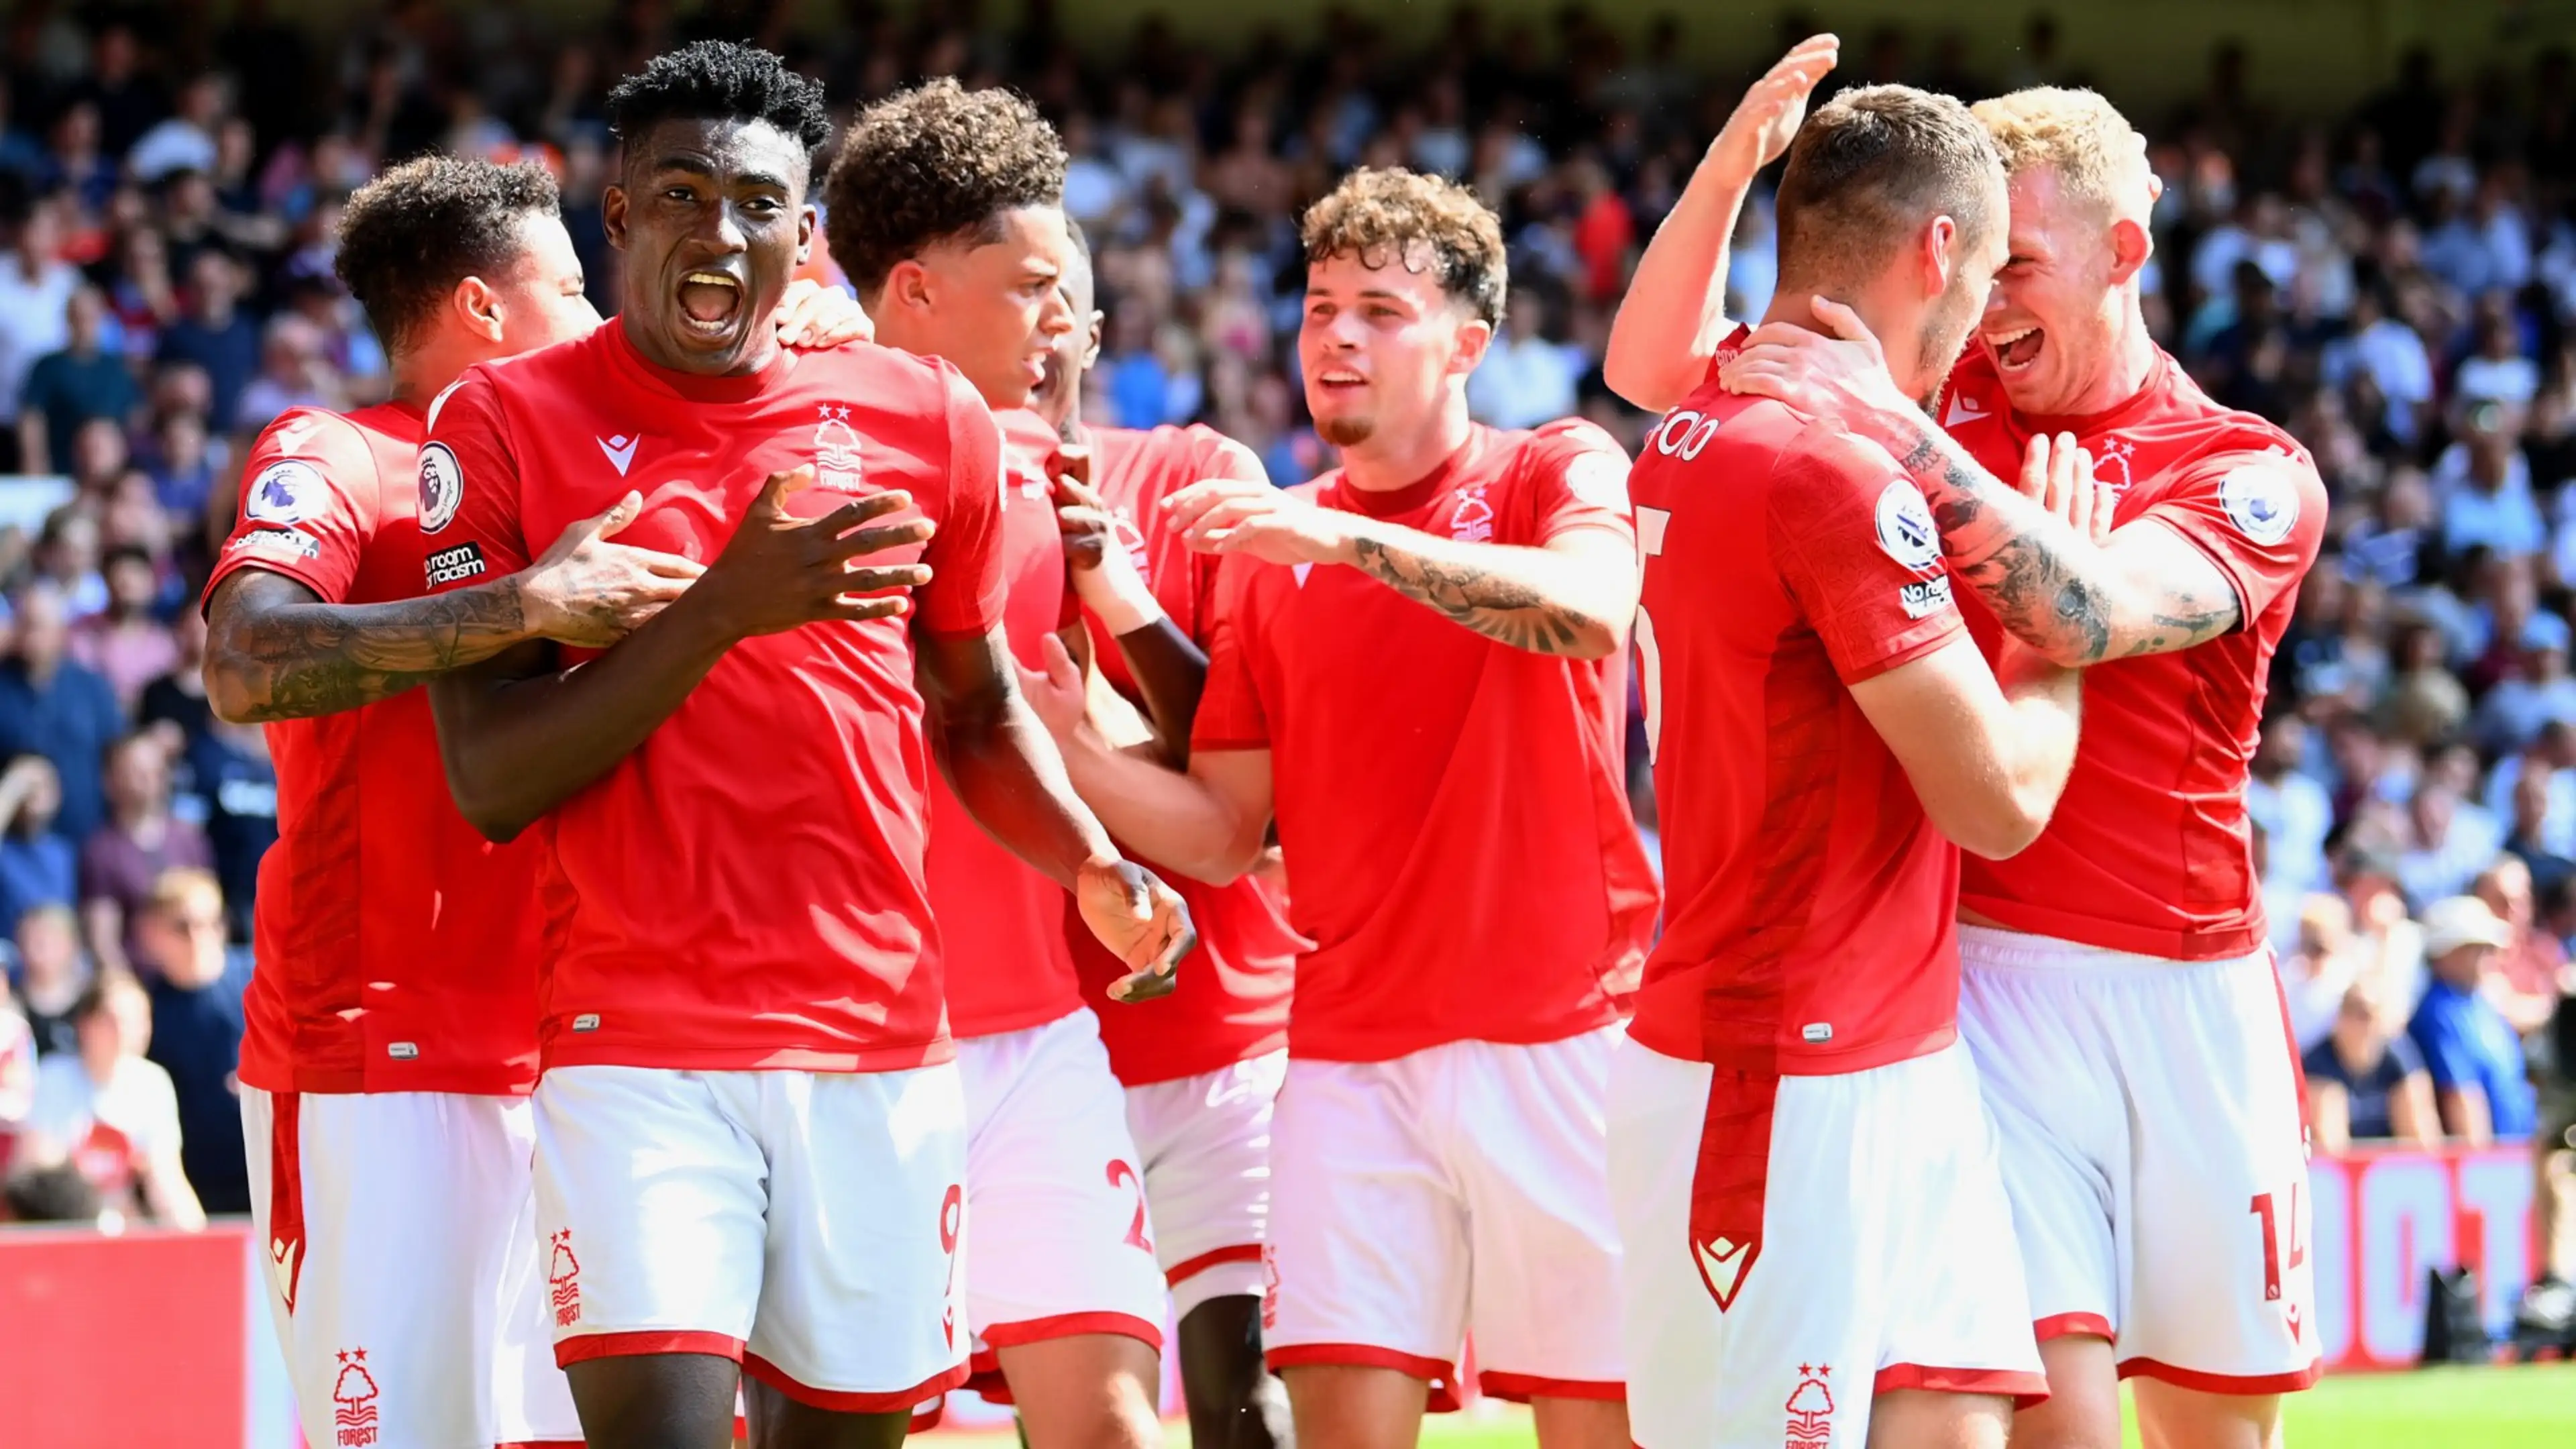 16 Facts About Nottingham Forest - Facts.net